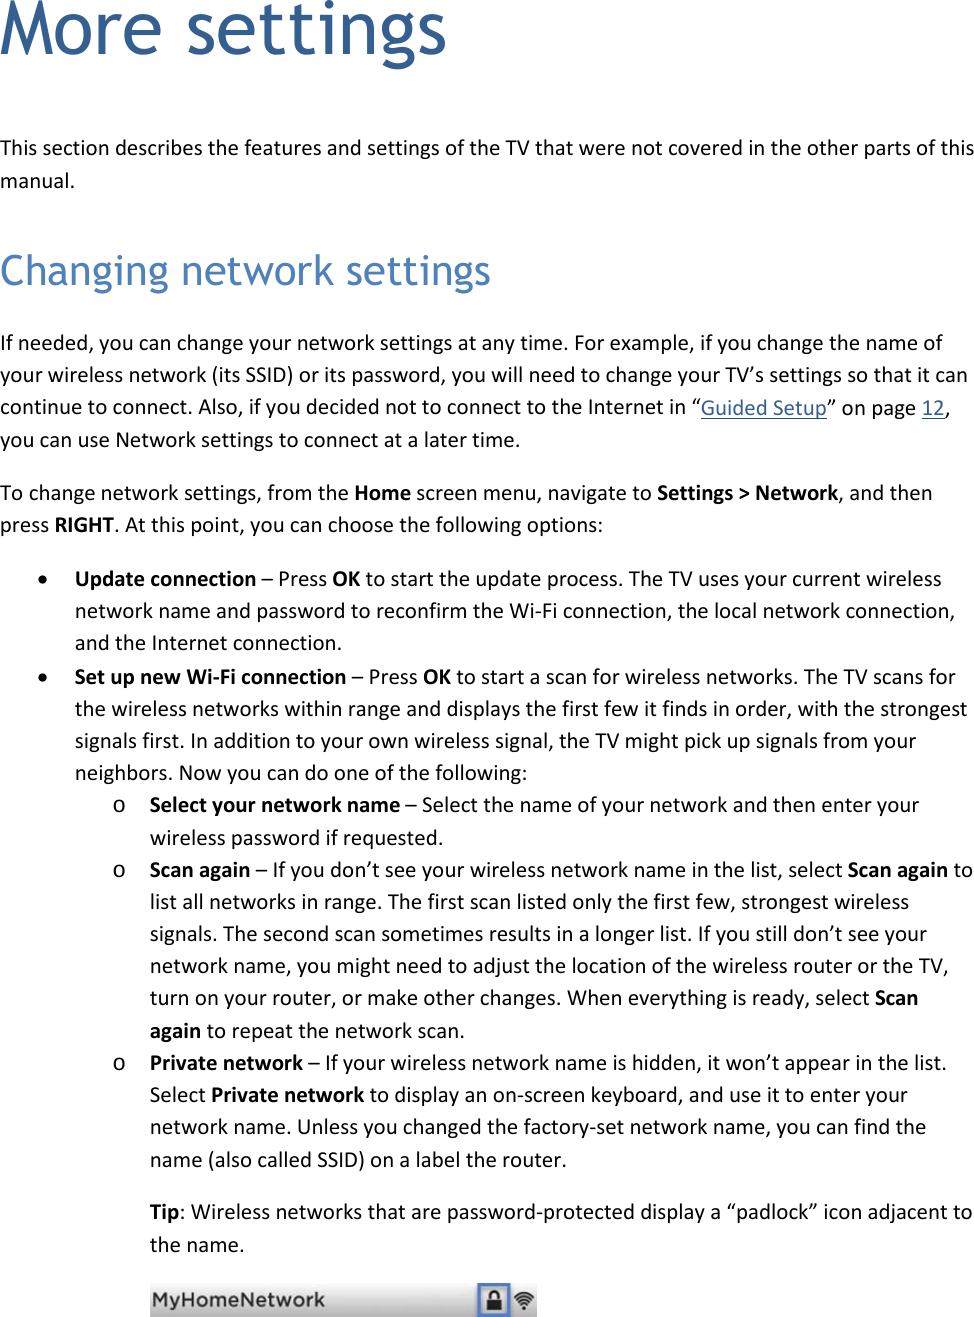   49 More settings This section describes the features and settings of the TV that were not covered in the other parts of this manual. Changing network settings If needed, you can change your network settings at any time. For example, if you change the name of your wireless network (its SSID) or its password, you will need to change your TV’s settings so that it can continue to connect. Also, if you decided not to connect to the Internet in “Guided Setup” on page 12, you can use Network settings to connect at a later time. To change network settings, from the Home screen menu, navigate to Settings &gt; Network, and then press RIGHT. At this point, you can choose the following options: • Update connection – Press OK to start the update process. The TV uses your current wireless network name and password to reconfirm the Wi-Fi connection, the local network connection, and the Internet connection. • Set up new Wi-Fi connection – Press OK to start a scan for wireless networks. The TV scans for the wireless networks within range and displays the first few it finds in order, with the strongest signals first. In addition to your own wireless signal, the TV might pick up signals from your neighbors. Now you can do one of the following: o Select your network name – Select the name of your network and then enter your wireless password if requested. o Scan again – If you don’t see your wireless network name in the list, select Scan again to list all networks in range. The first scan listed only the first few, strongest wireless signals. The second scan sometimes results in a longer list. If you still don’t see your network name, you might need to adjust the location of the wireless router or the TV, turn on your router, or make other changes. When everything is ready, select Scan again to repeat the network scan. o Private network – If your wireless network name is hidden, it won’t appear in the list. Select Private network to display an on-screen keyboard, and use it to enter your network name. Unless you changed the factory-set network name, you can find the name (also called SSID) on a label the router.  Tip: Wireless networks that are password-protected display a “padlock” icon adjacent to the name.   